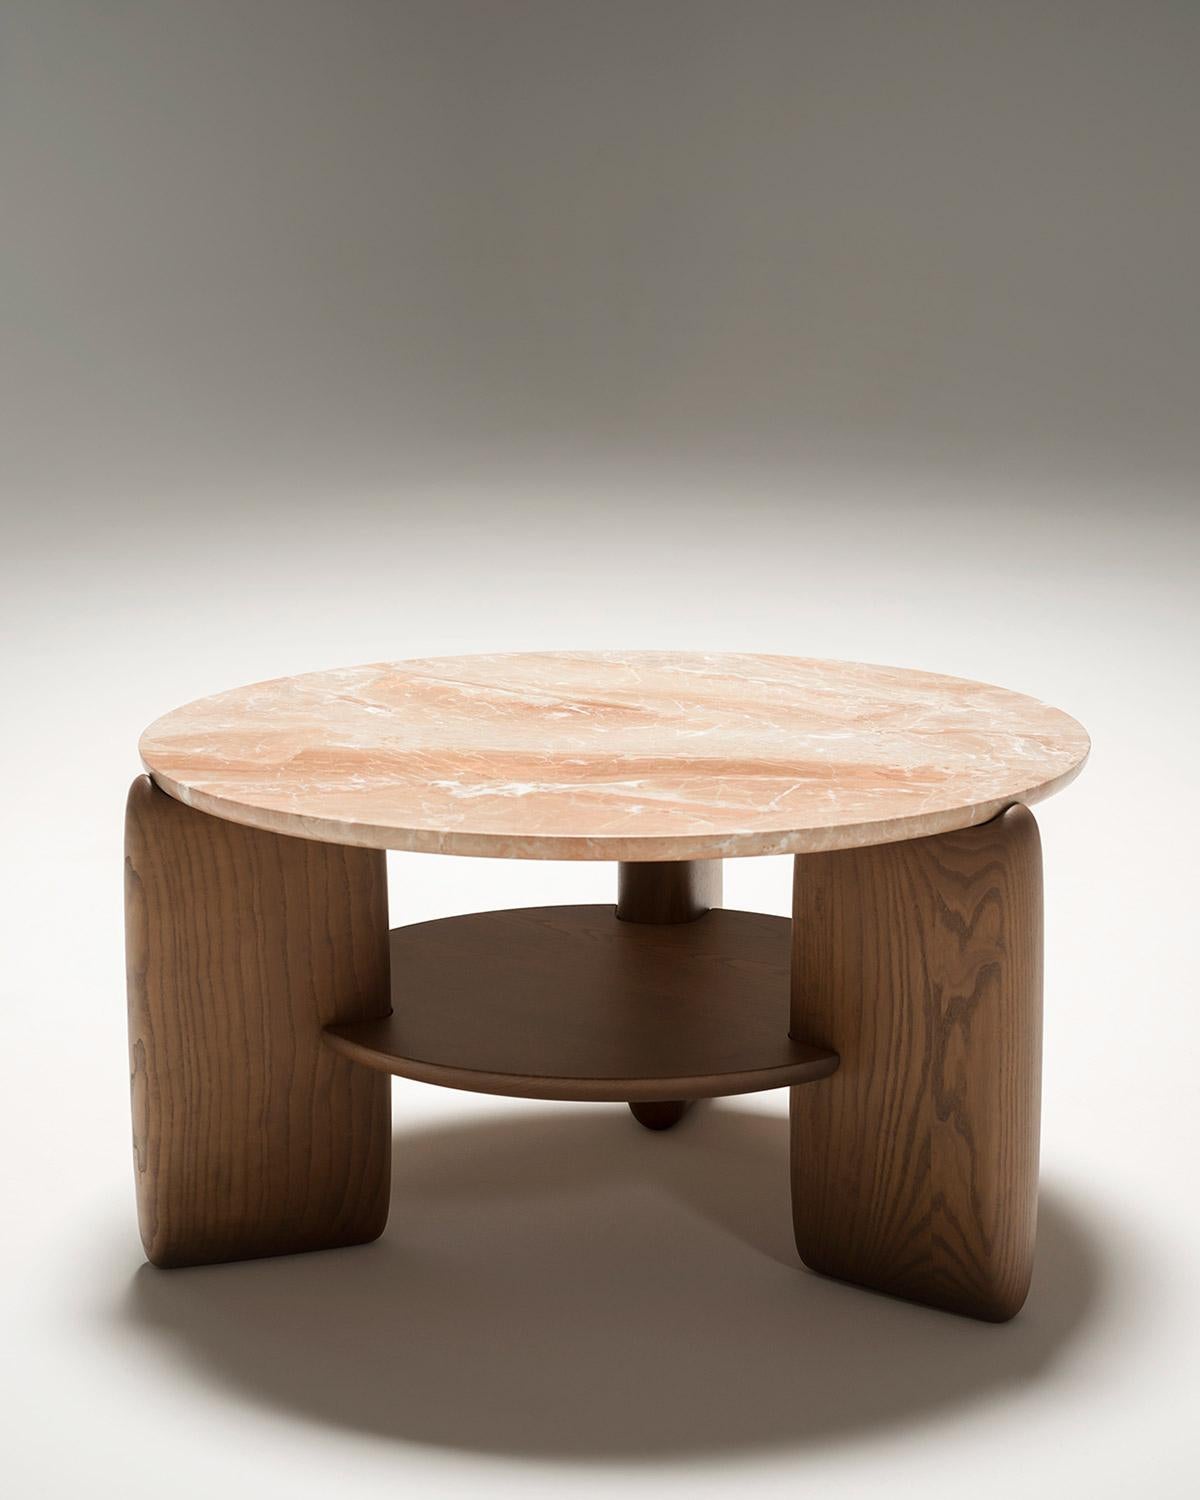 Contemporary Tacchini Kanji Marble & Wood Table Designed by Monica Förster For Sale